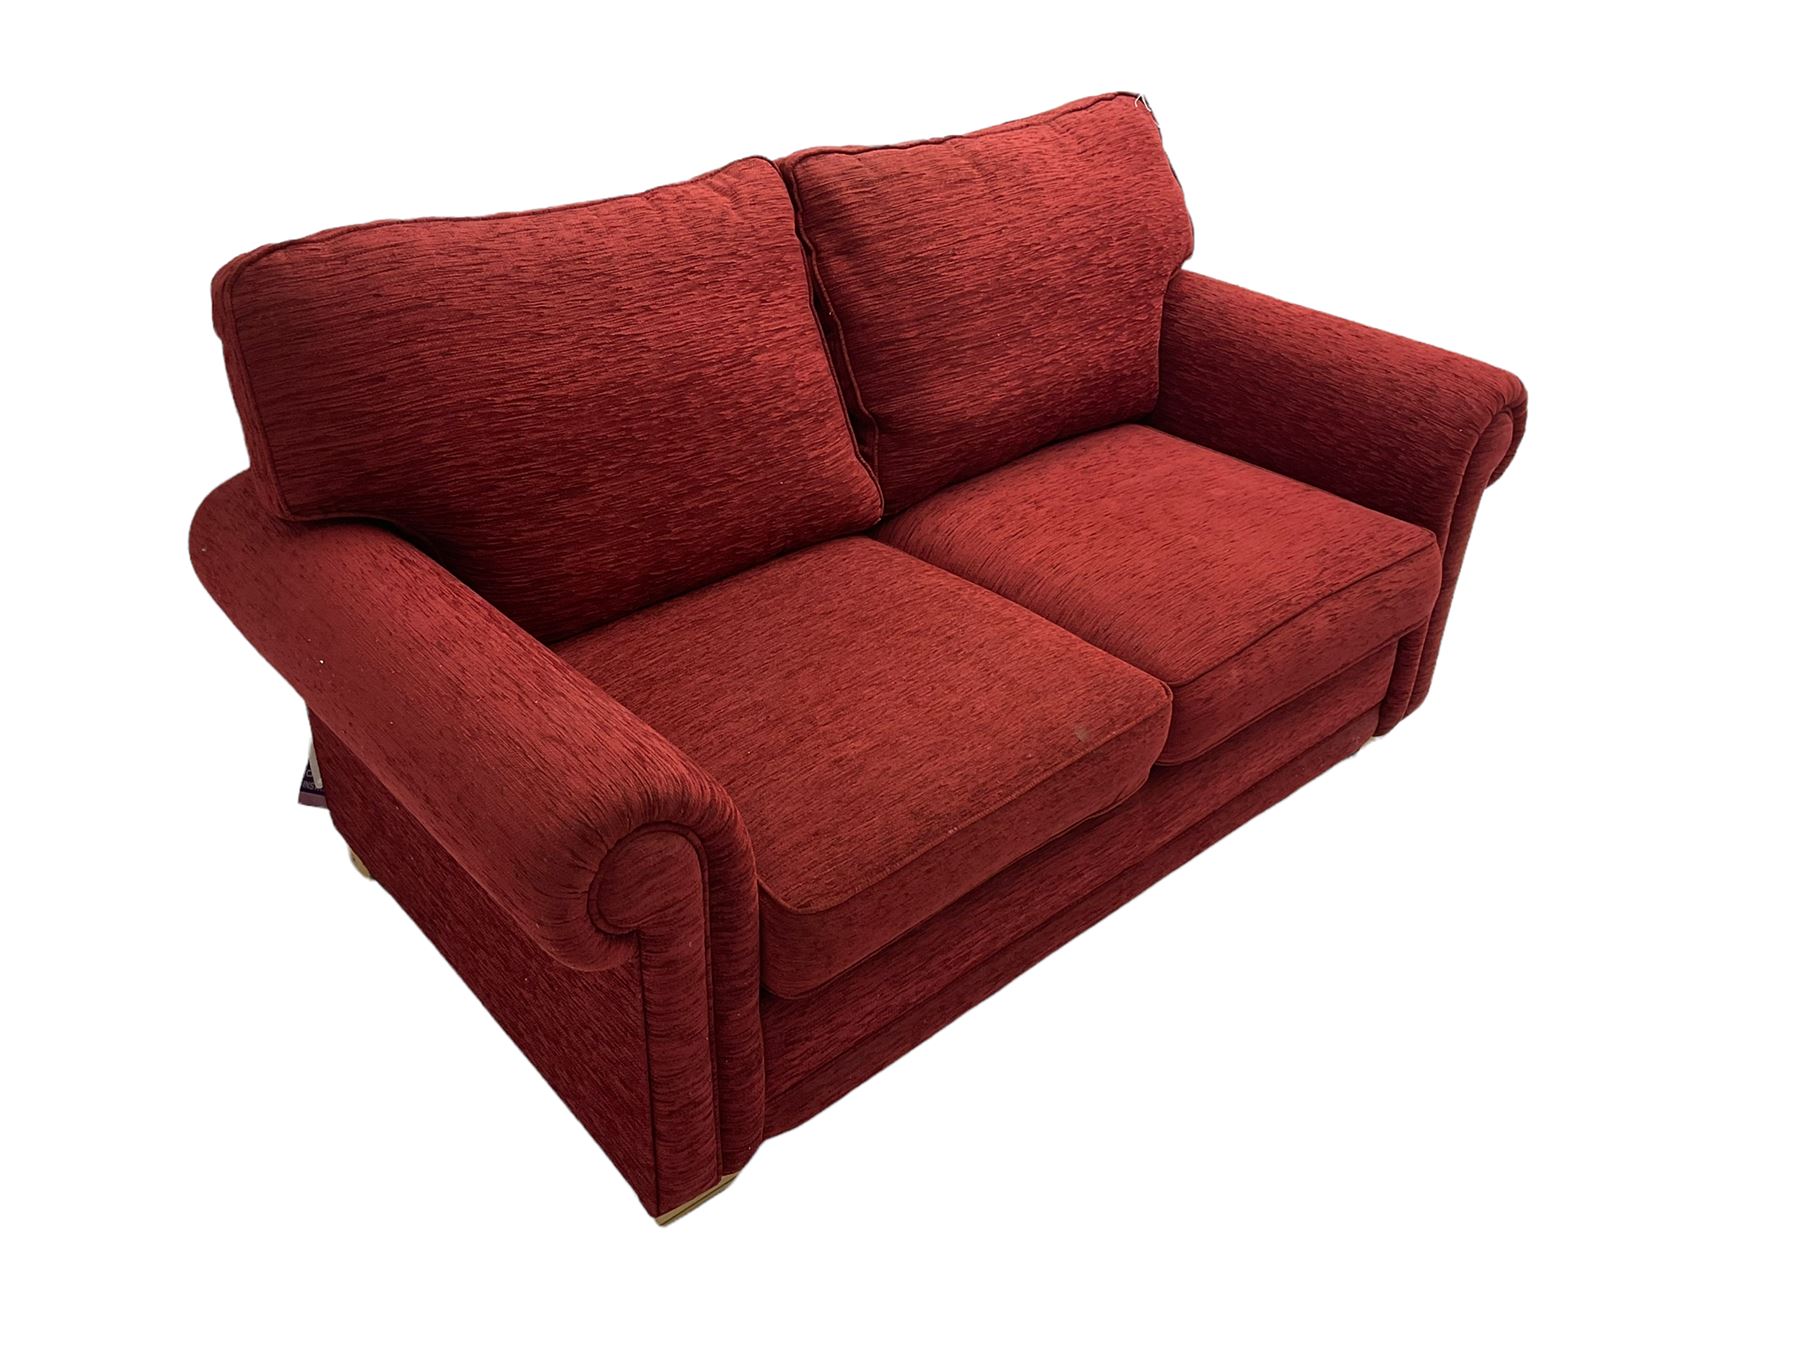 Two seat metal actions sofa bed upholstered in red cover - Image 6 of 6